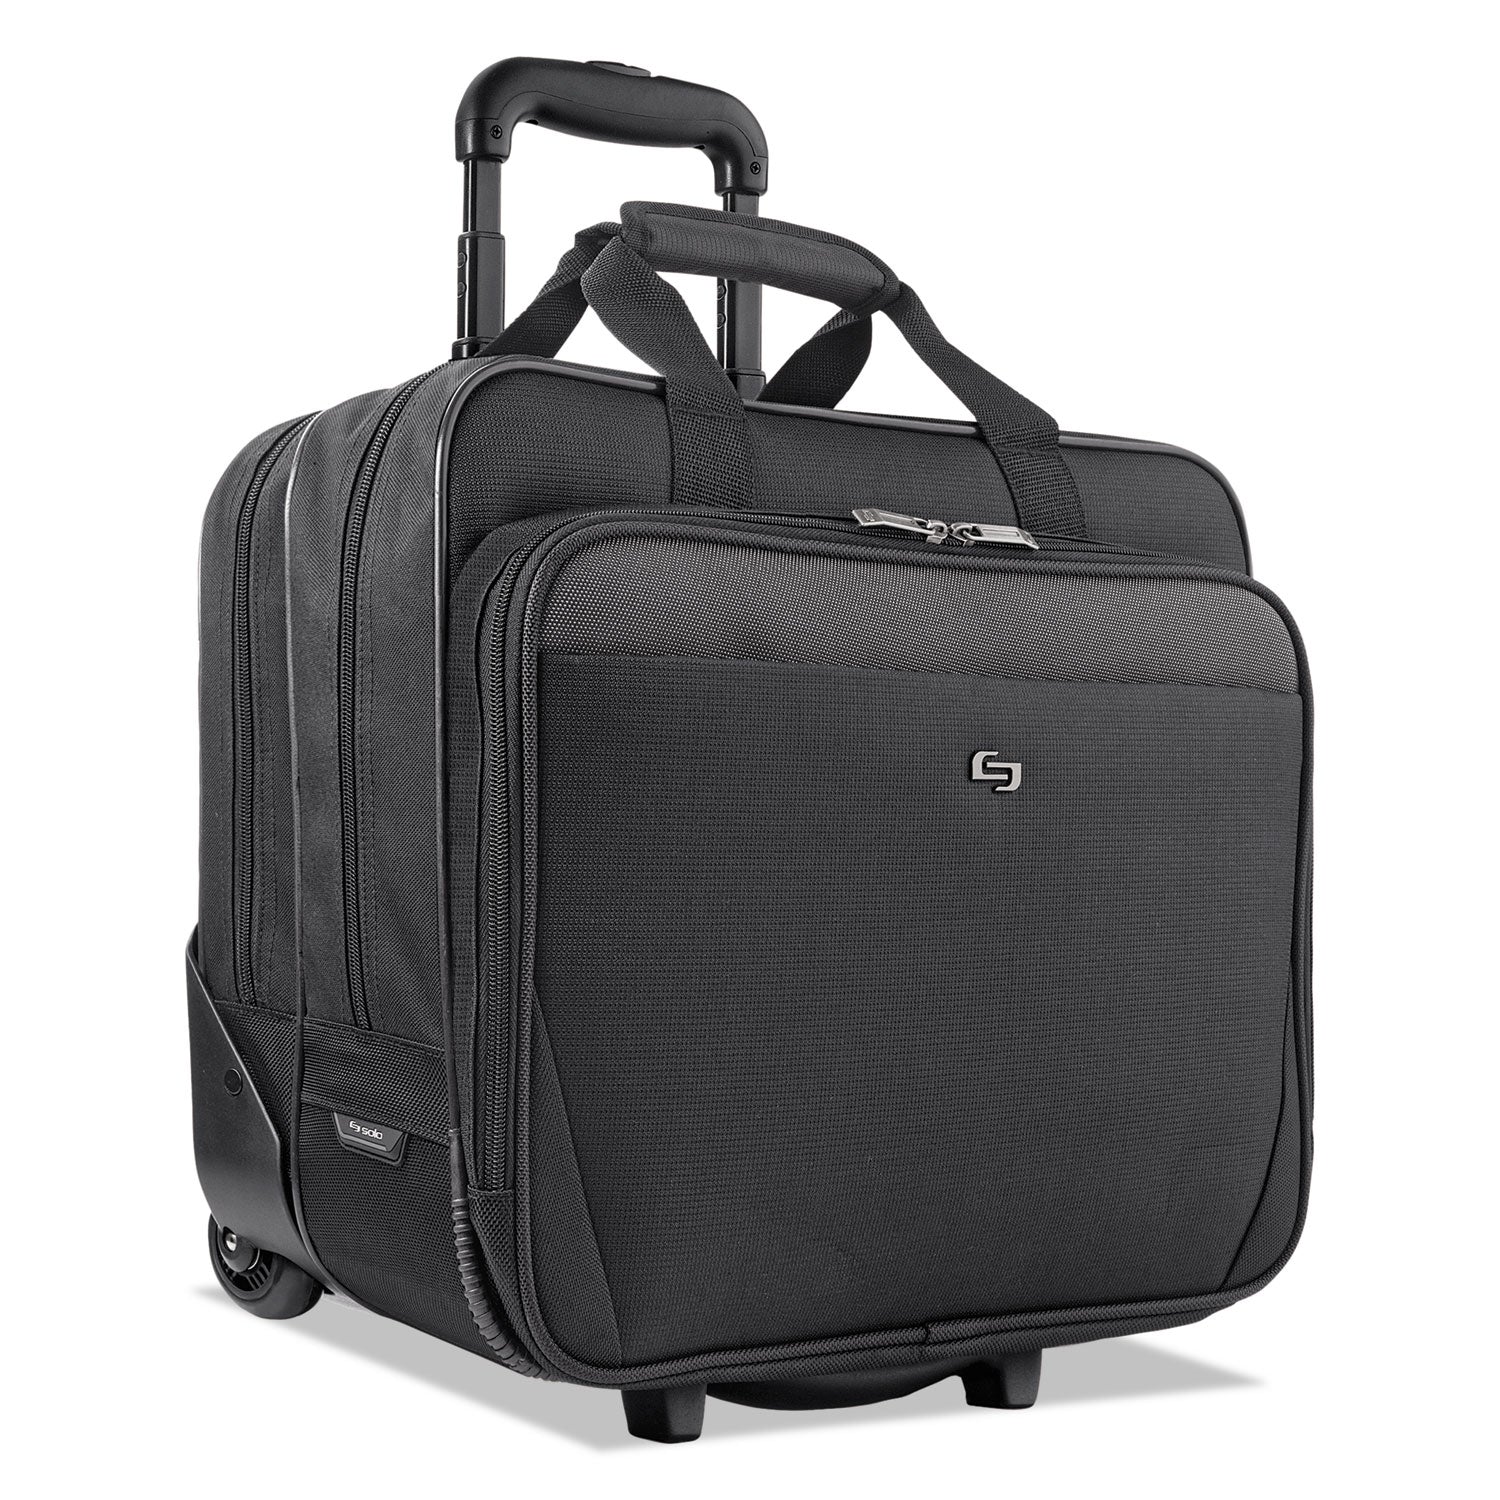 Classic Rolling Case, Fits Devices Up to 17.3", Polyester, 16.75 x 7 x 14.38, Black - 